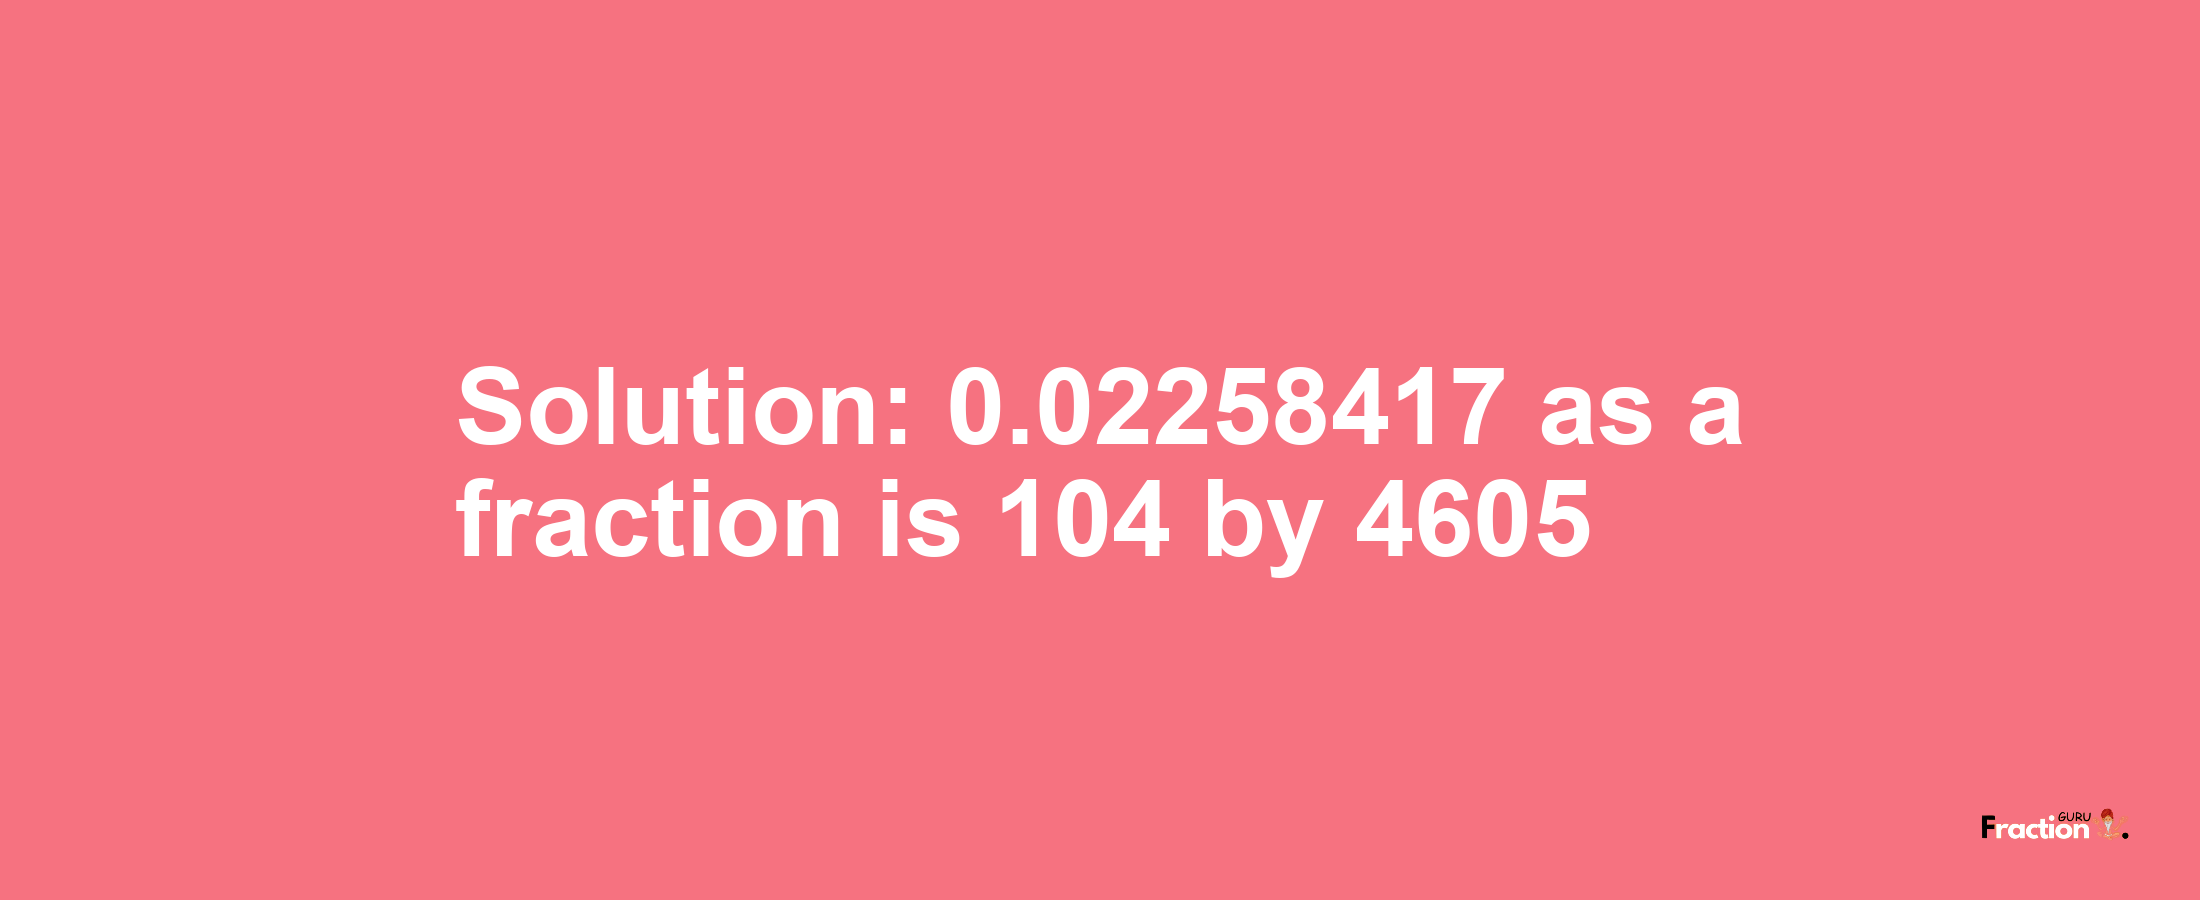 Solution:0.02258417 as a fraction is 104/4605